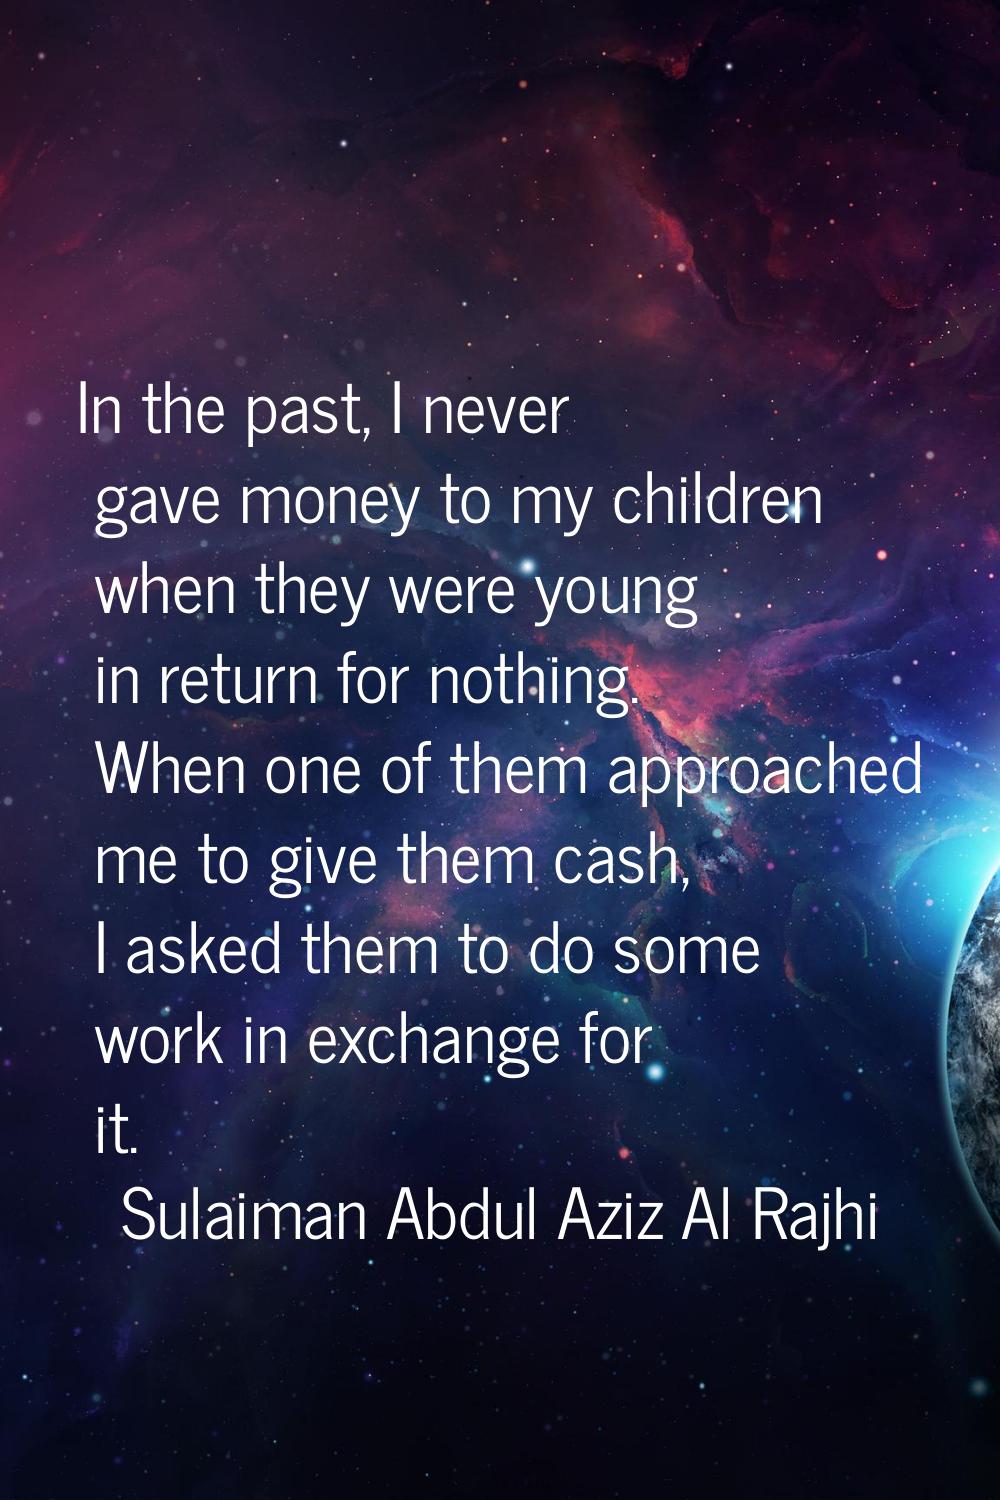 In the past, I never gave money to my children when they were young in return for nothing. When one